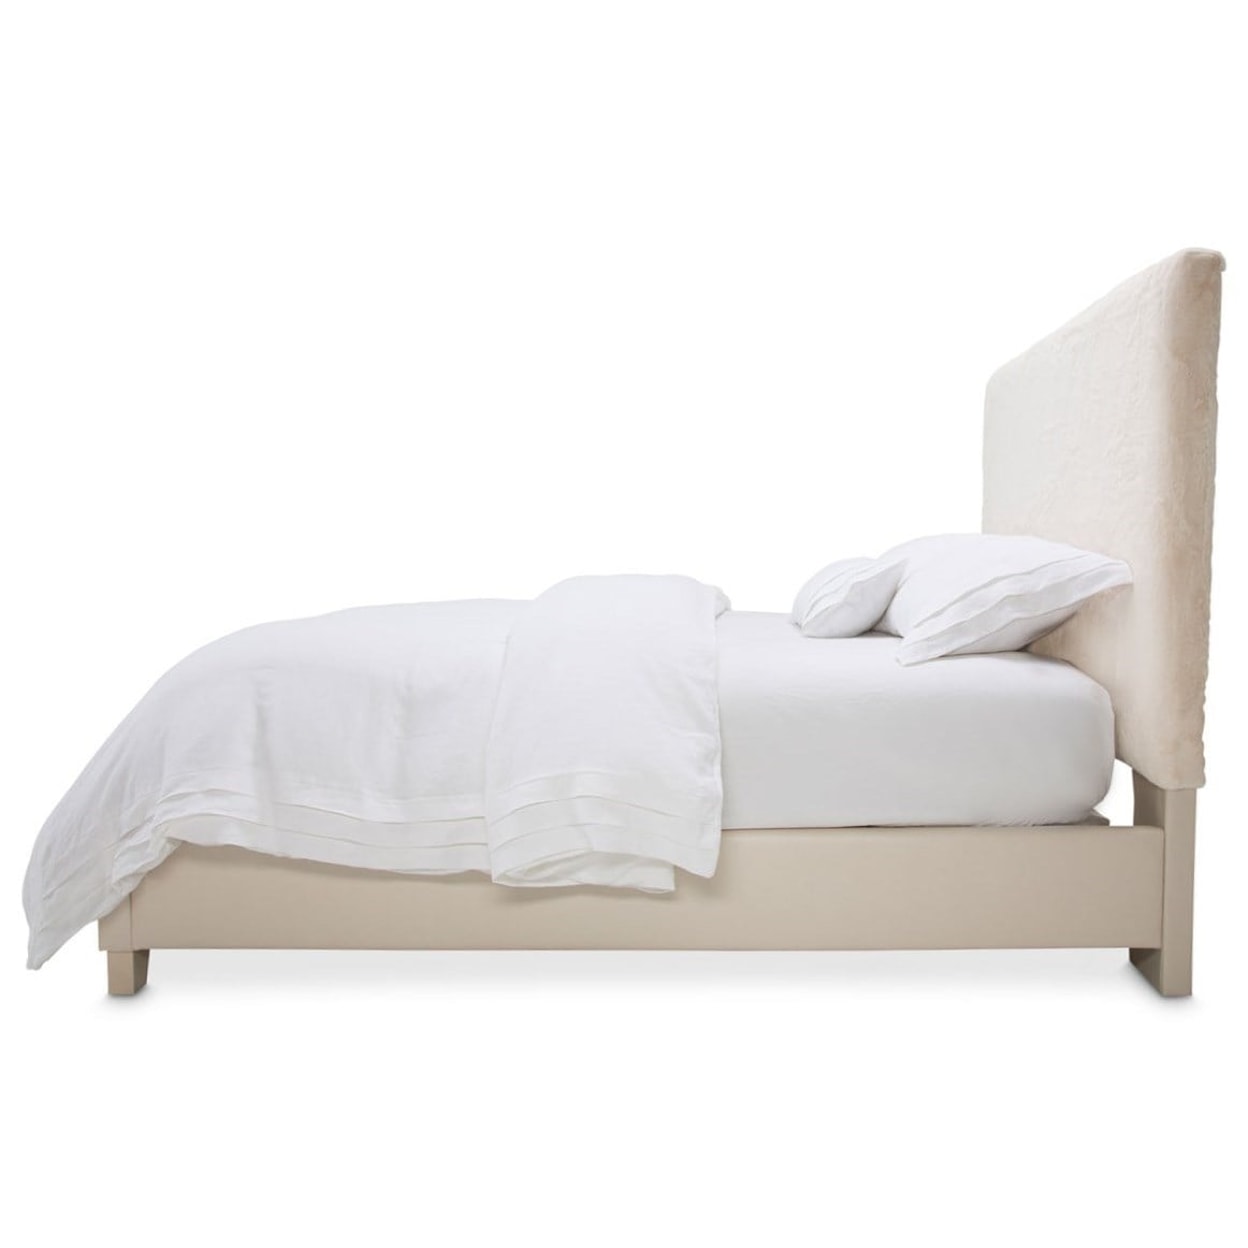 Michael Amini Emerson Upholstered Queen Bed